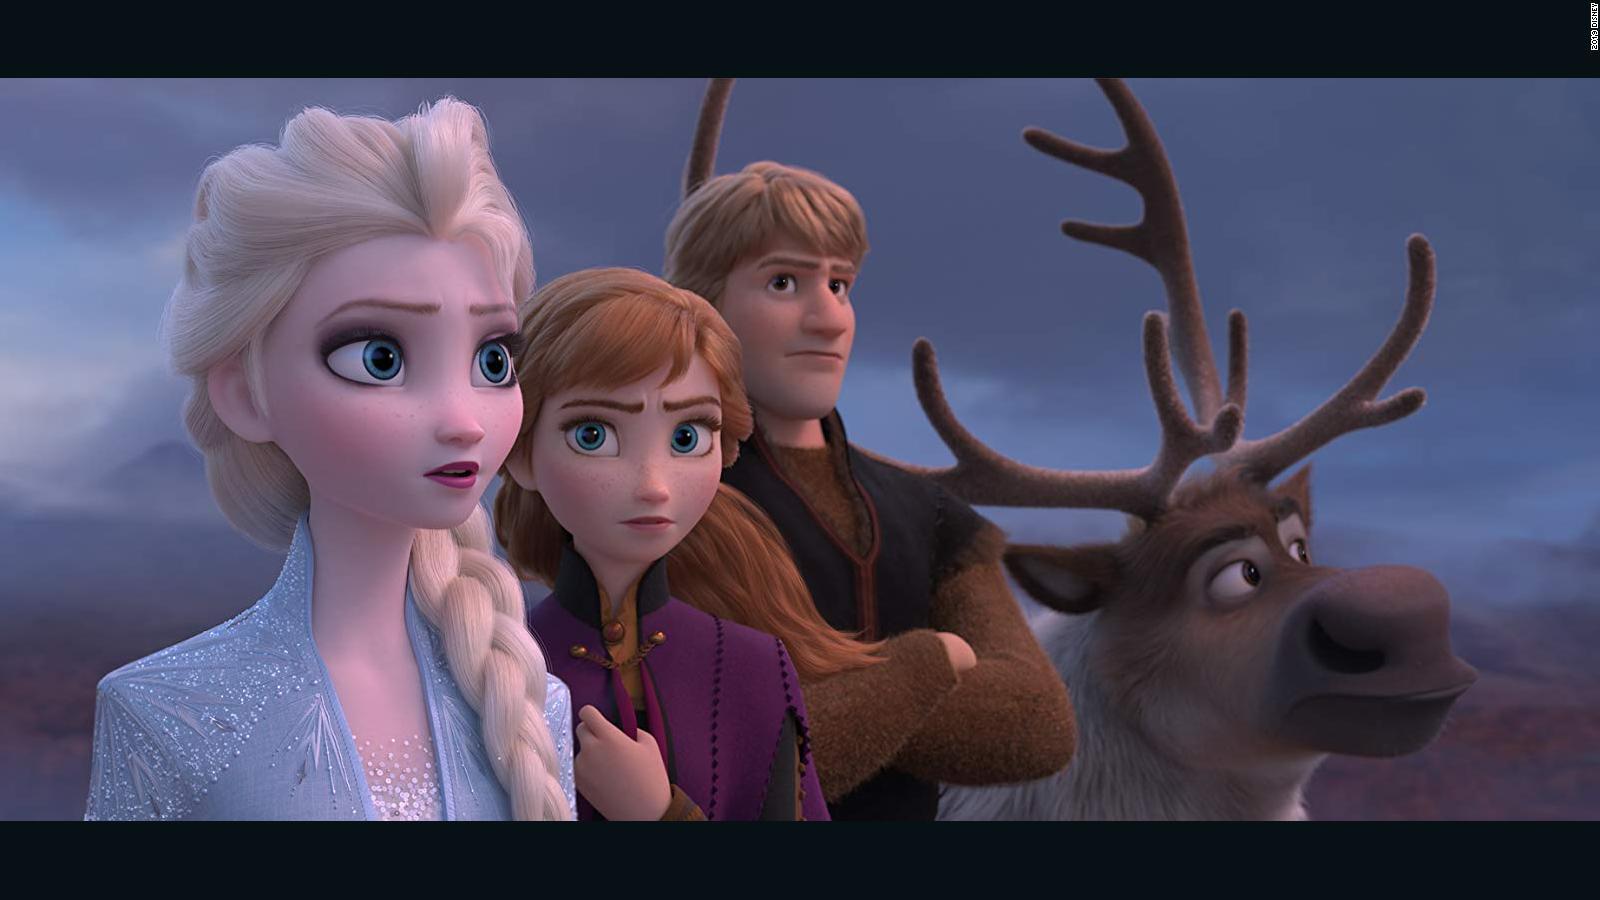 The 'Frozen 2' trailer is finally here